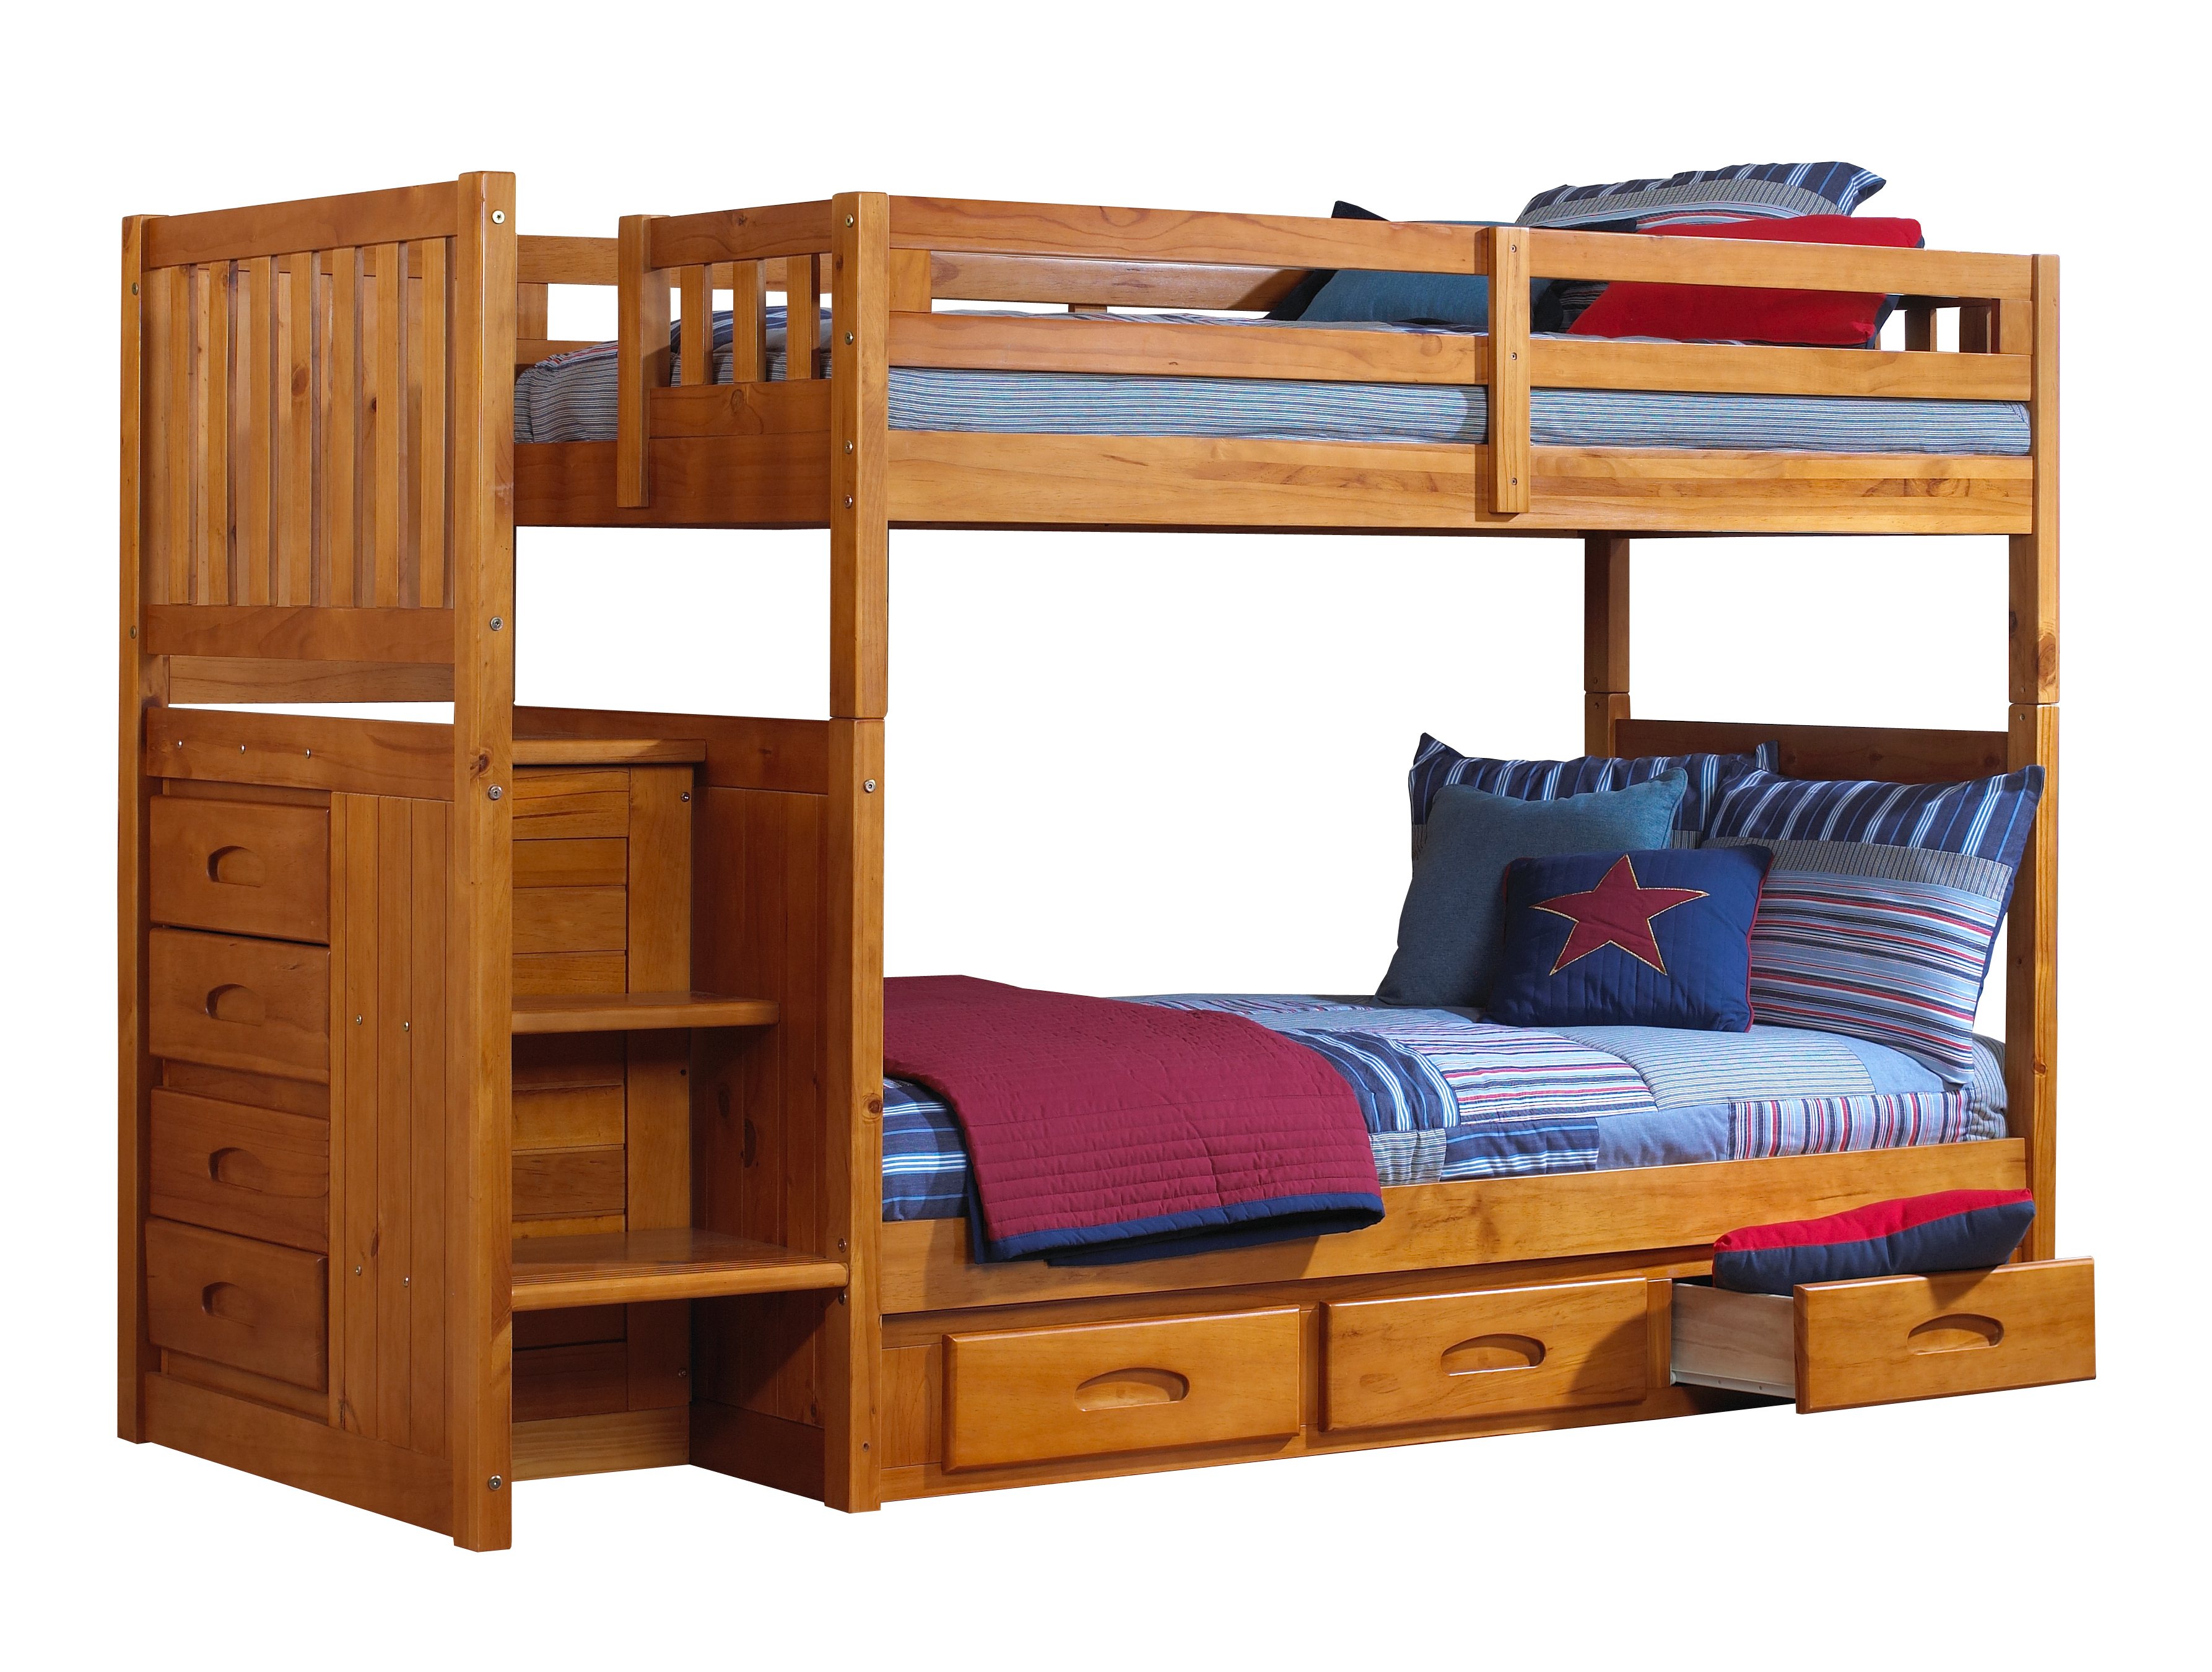 Twin Honey Mission Staircase Bunk Beds, Bunk Bed With Desk And Bookshelf